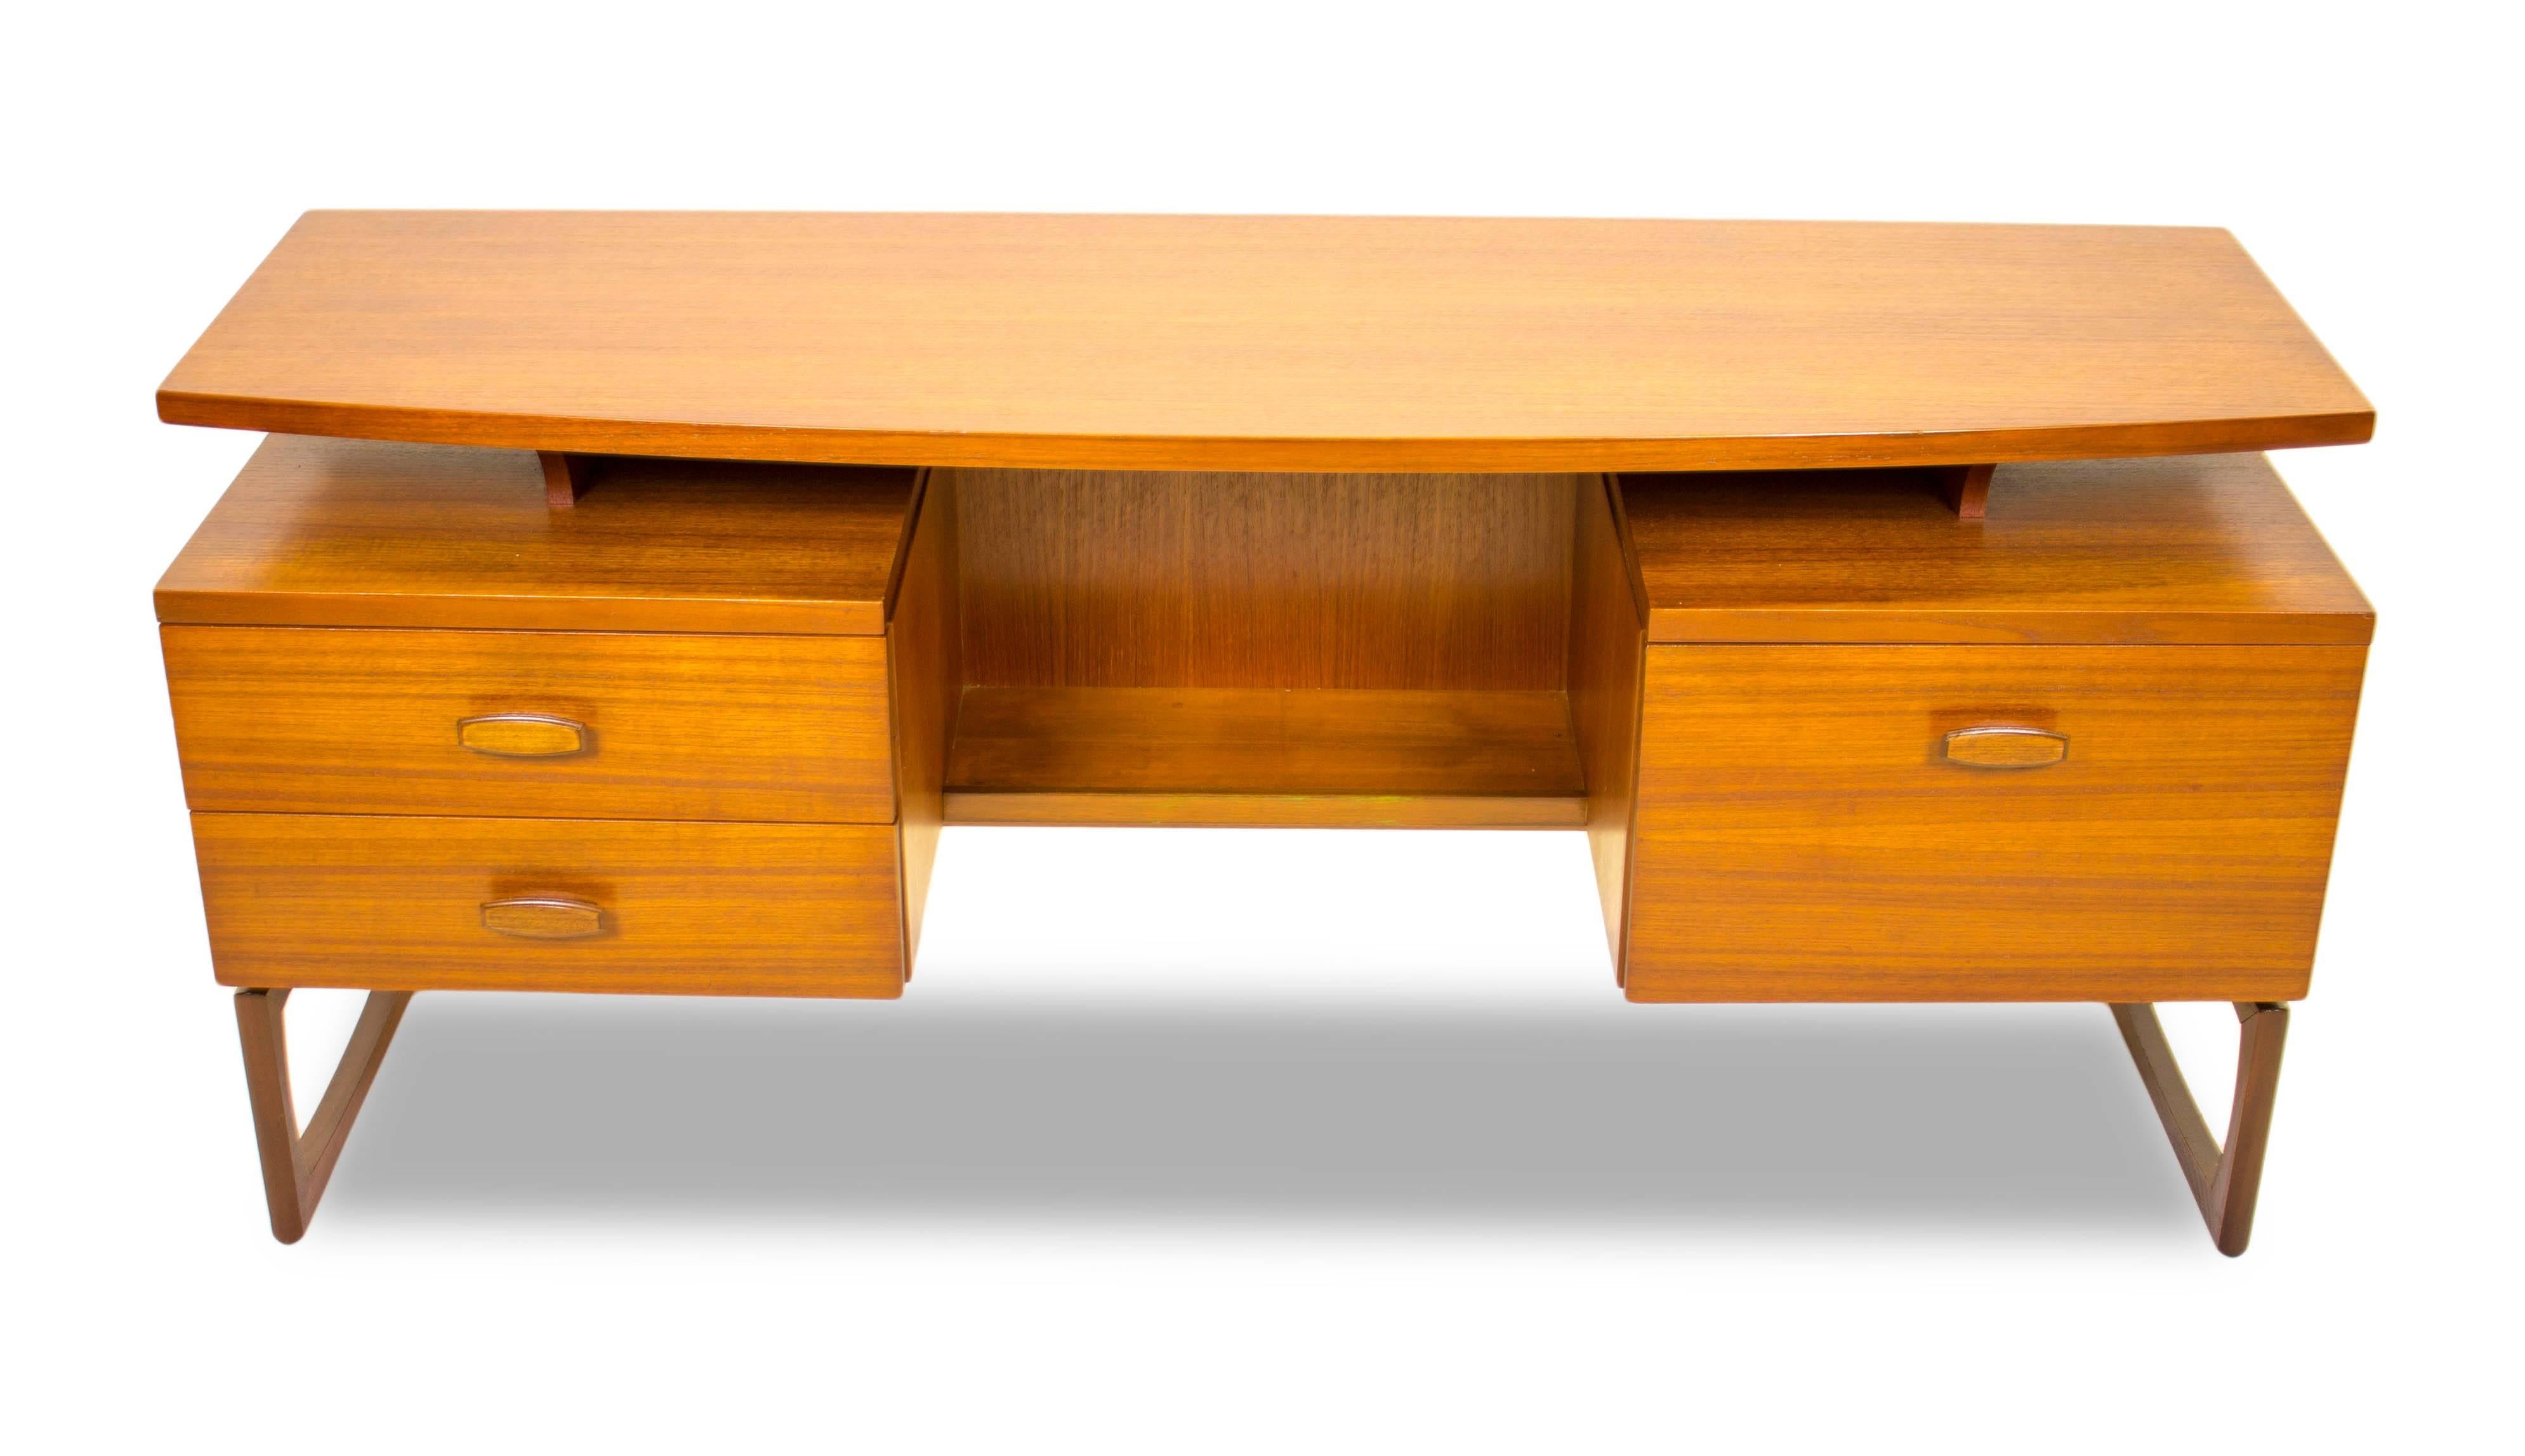 1965 could be argued as one of the best years for G Plan design with R Bennett creating the stunning Quadrille range of furniture in luxurious teak with beautiful rosewood handles.

An elegant and striking design, this desk is a stunning Danish